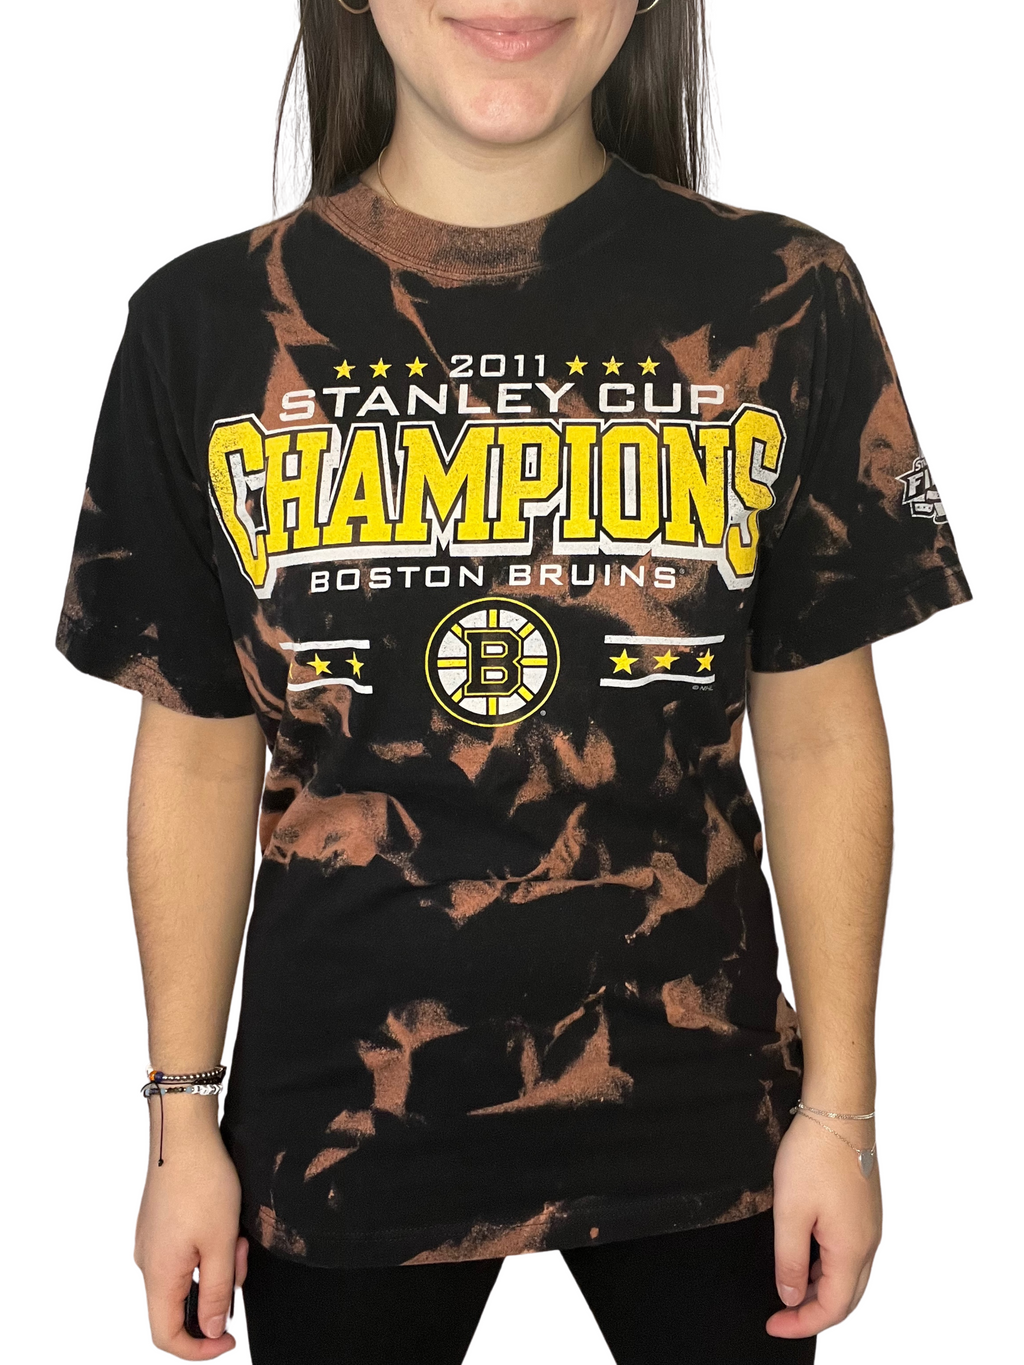 Boston Bruins 2011 Stanley Cup Champions Bleached Shirt